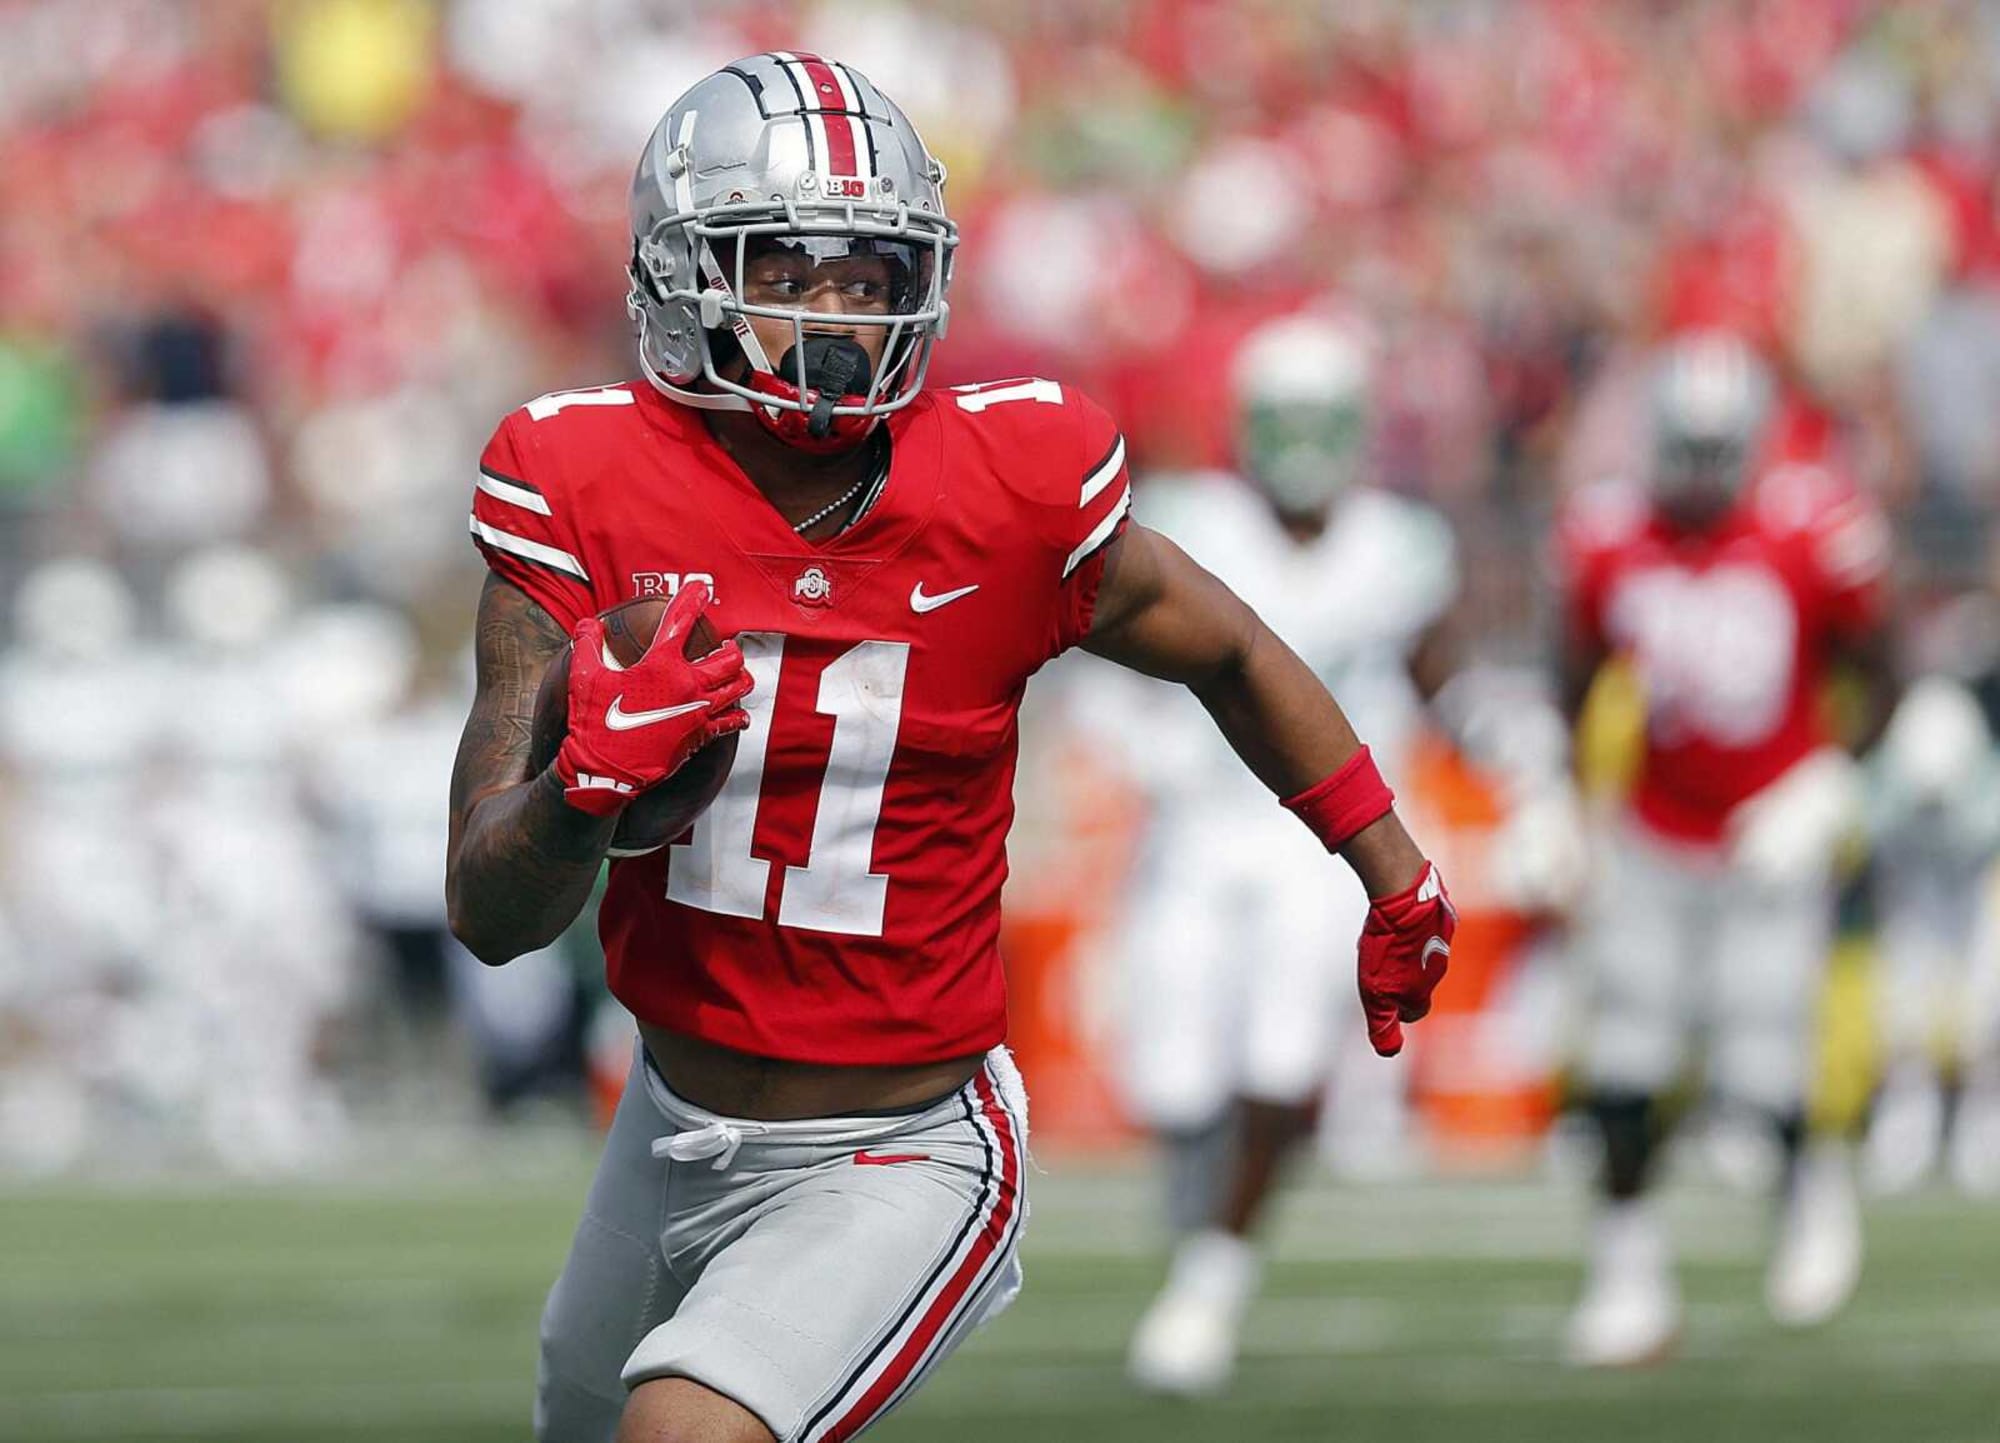 Ohio State Football game today: Ohio State vs. Maryland injury report,  spread, over/under, schedule, live stream, TV channel